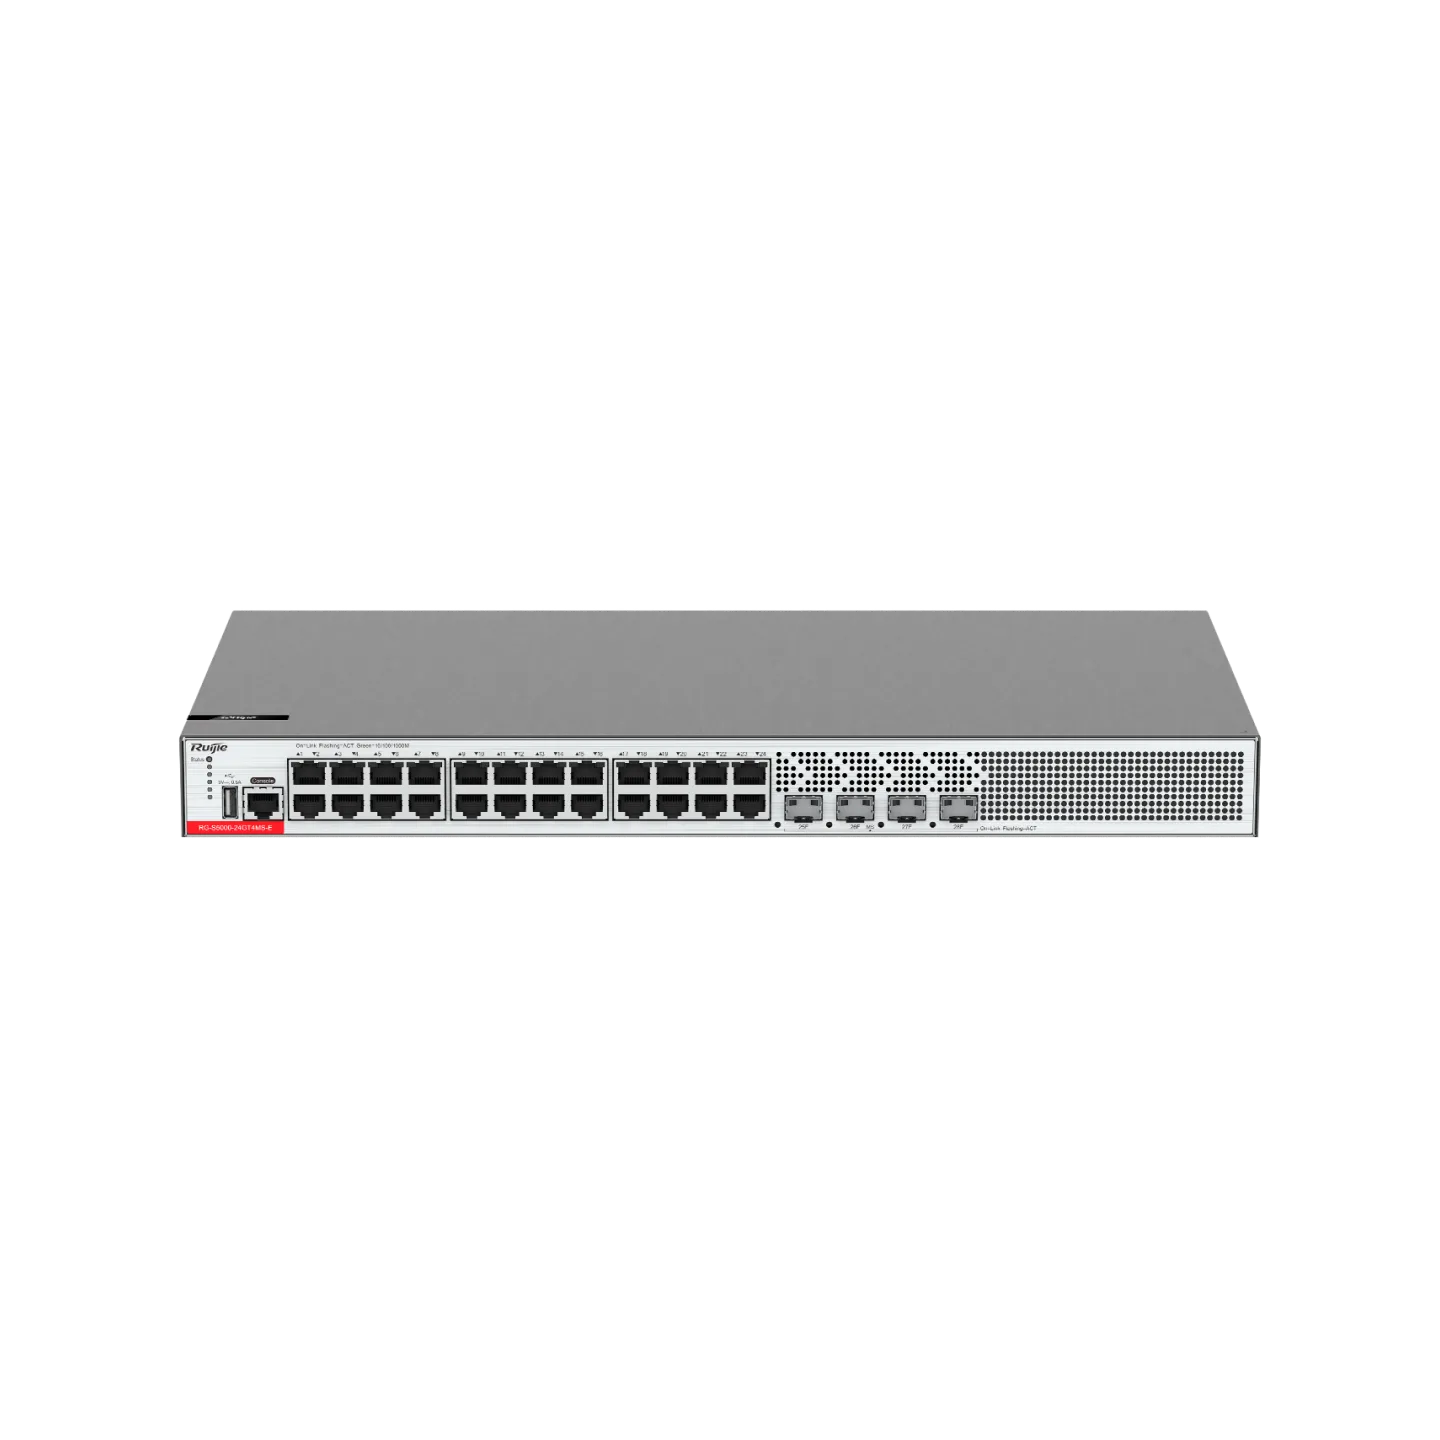 Industrial Layer 2+ Gigabit Managed Switch with 10G SFP+ slots Vietnam